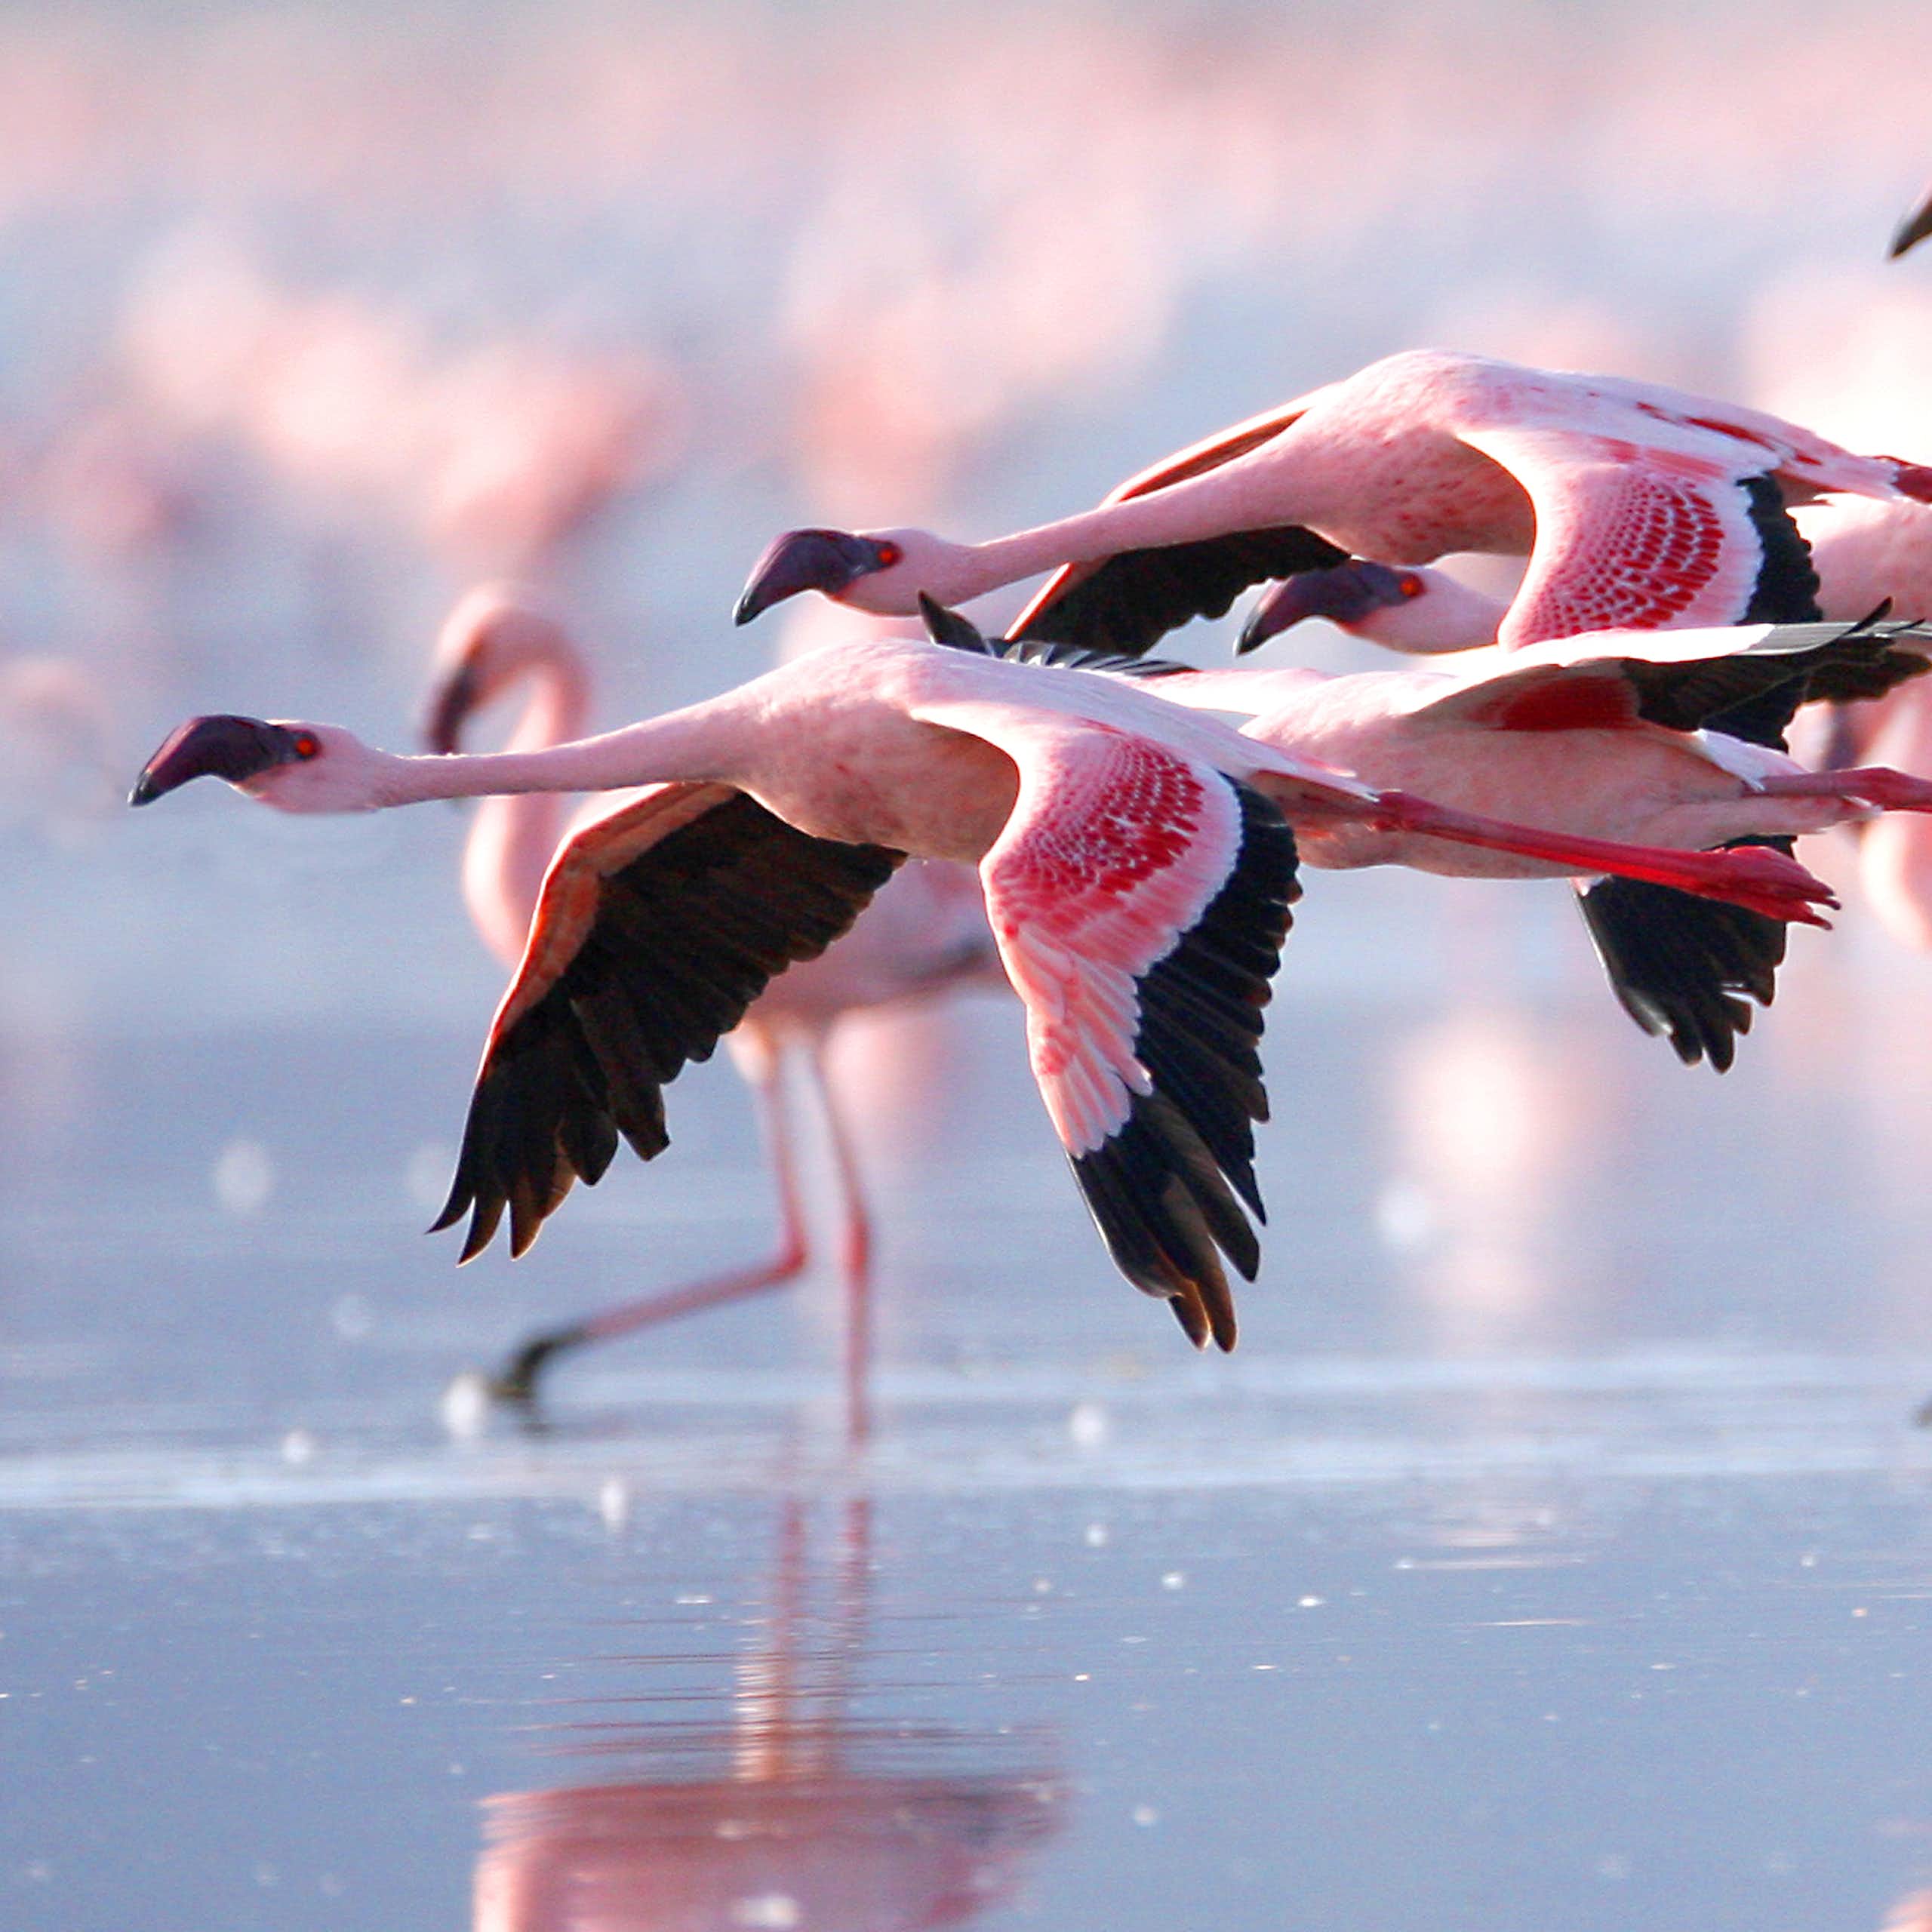 East Africa’s ‘soda lakes’ are rising, threatening their iconic flamingos